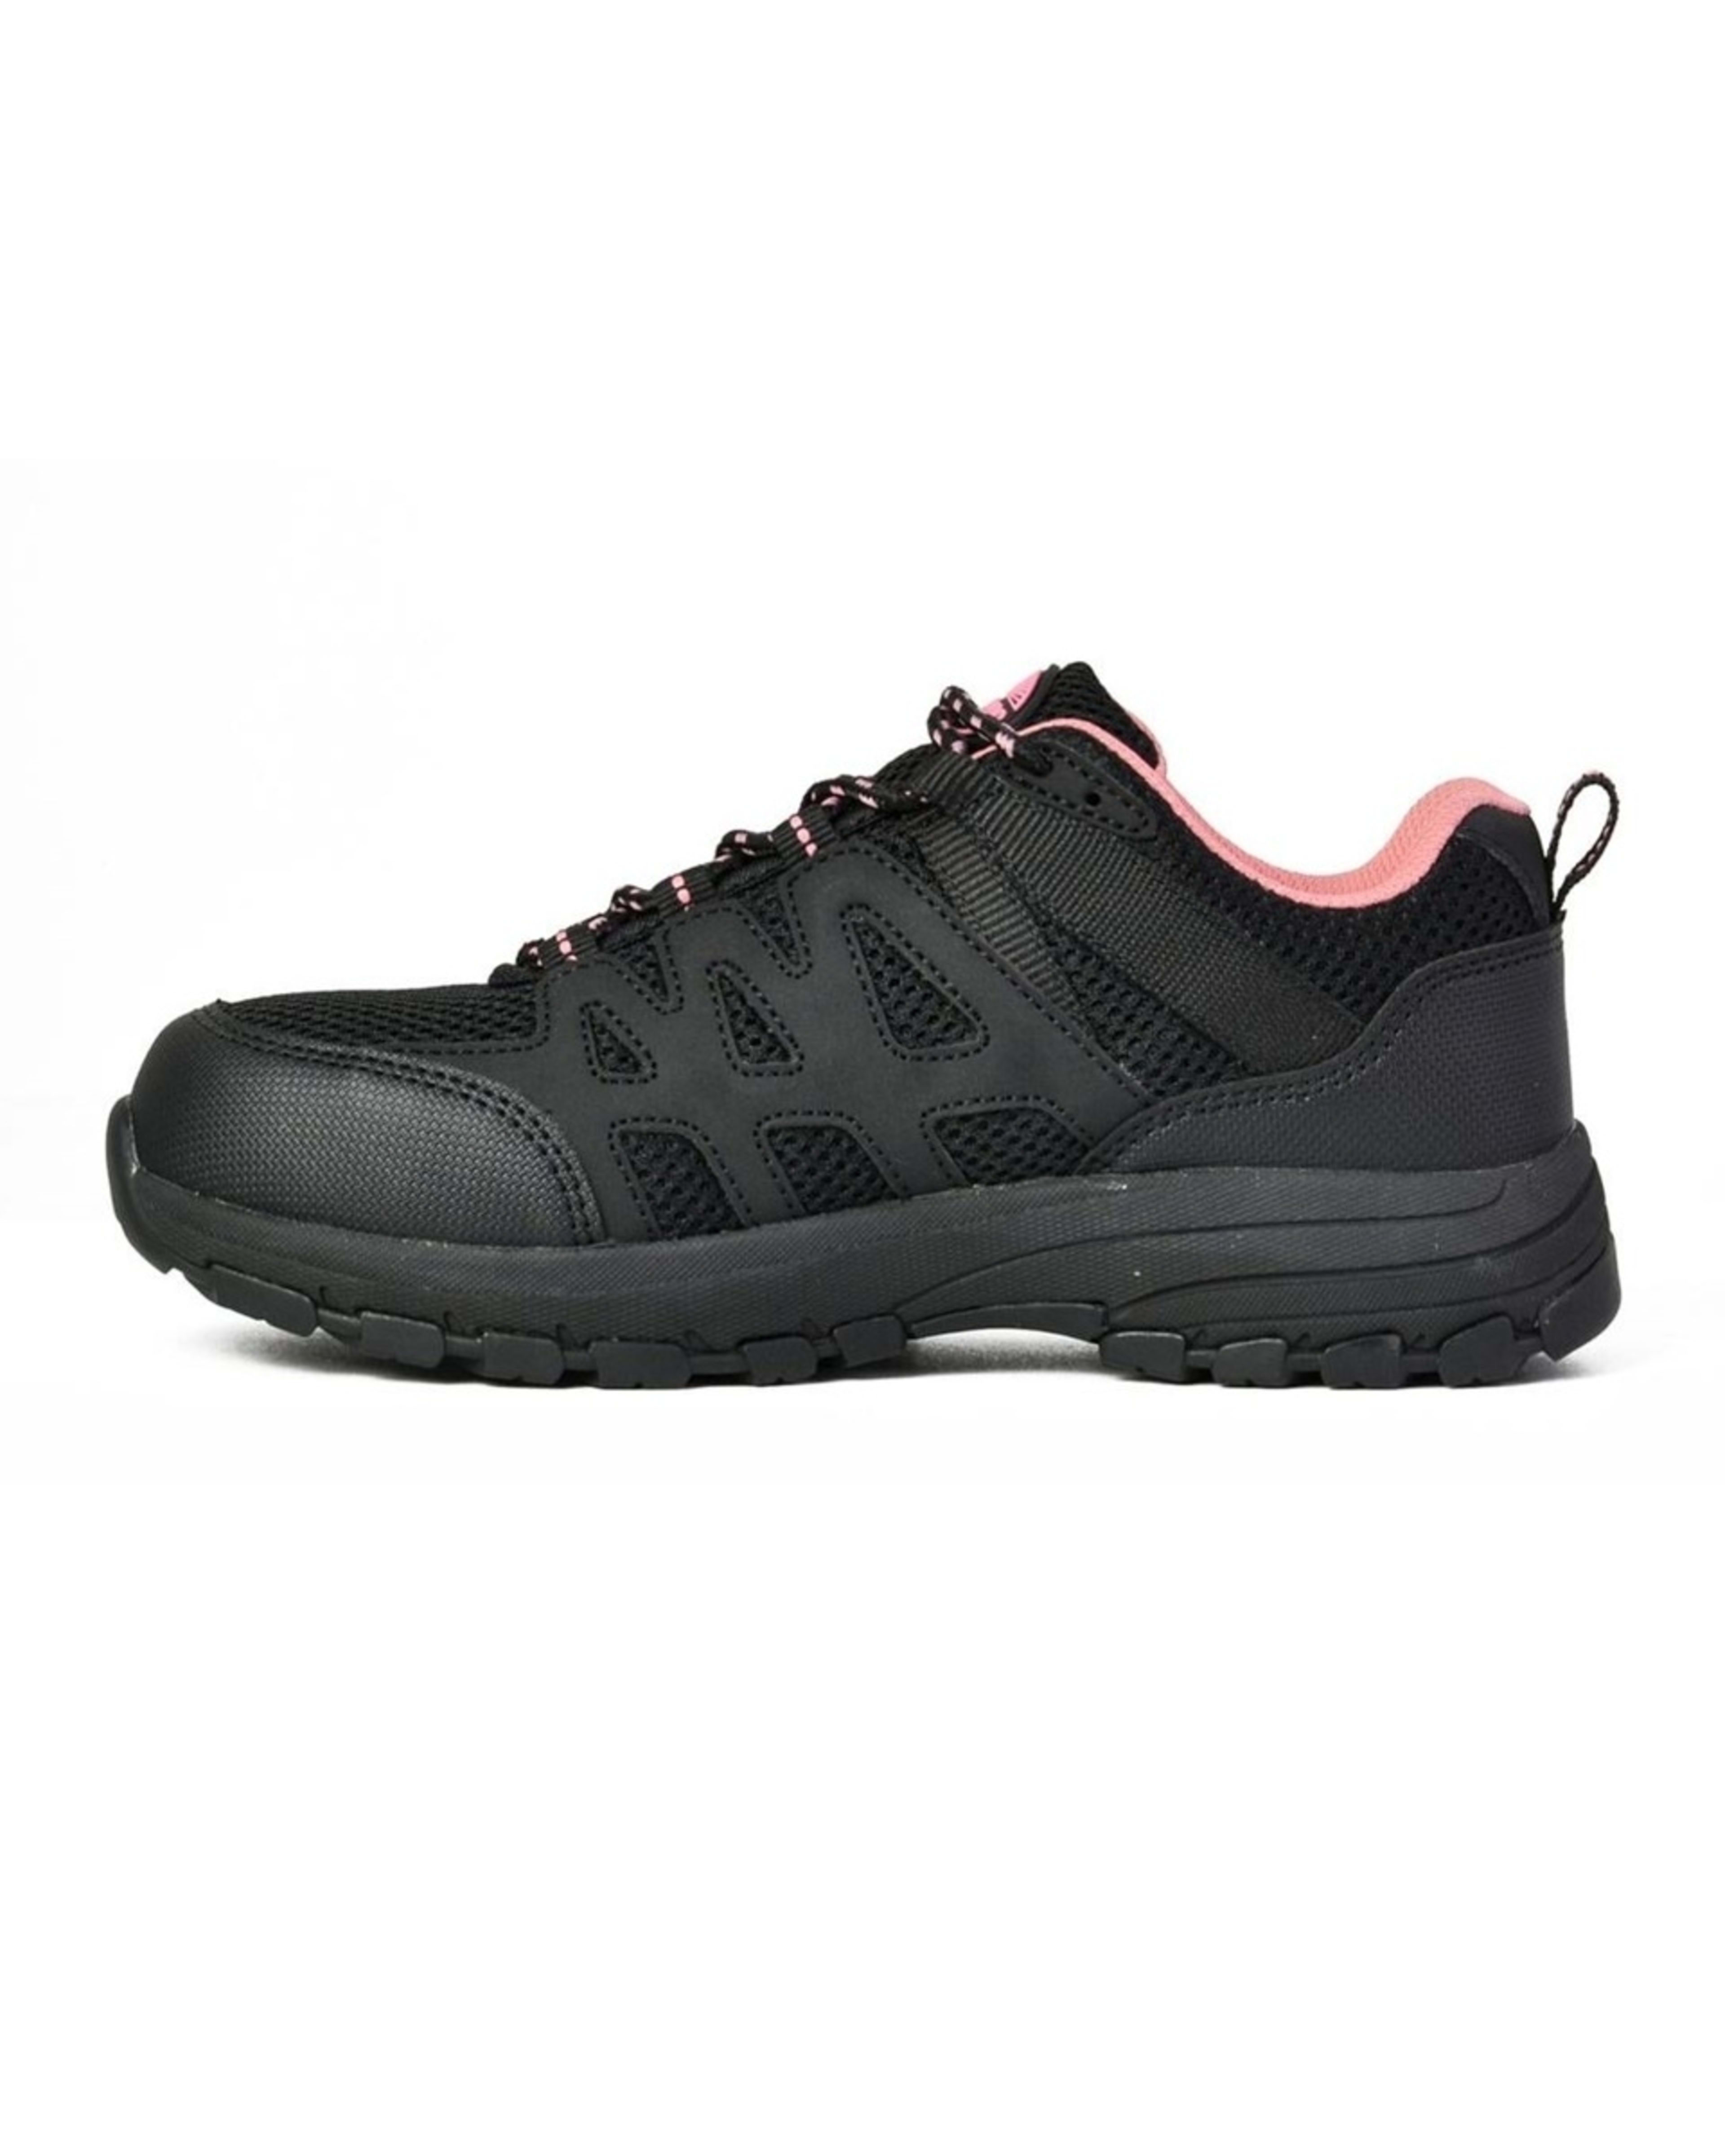 Safety Lace Up Sneakers - Kmart